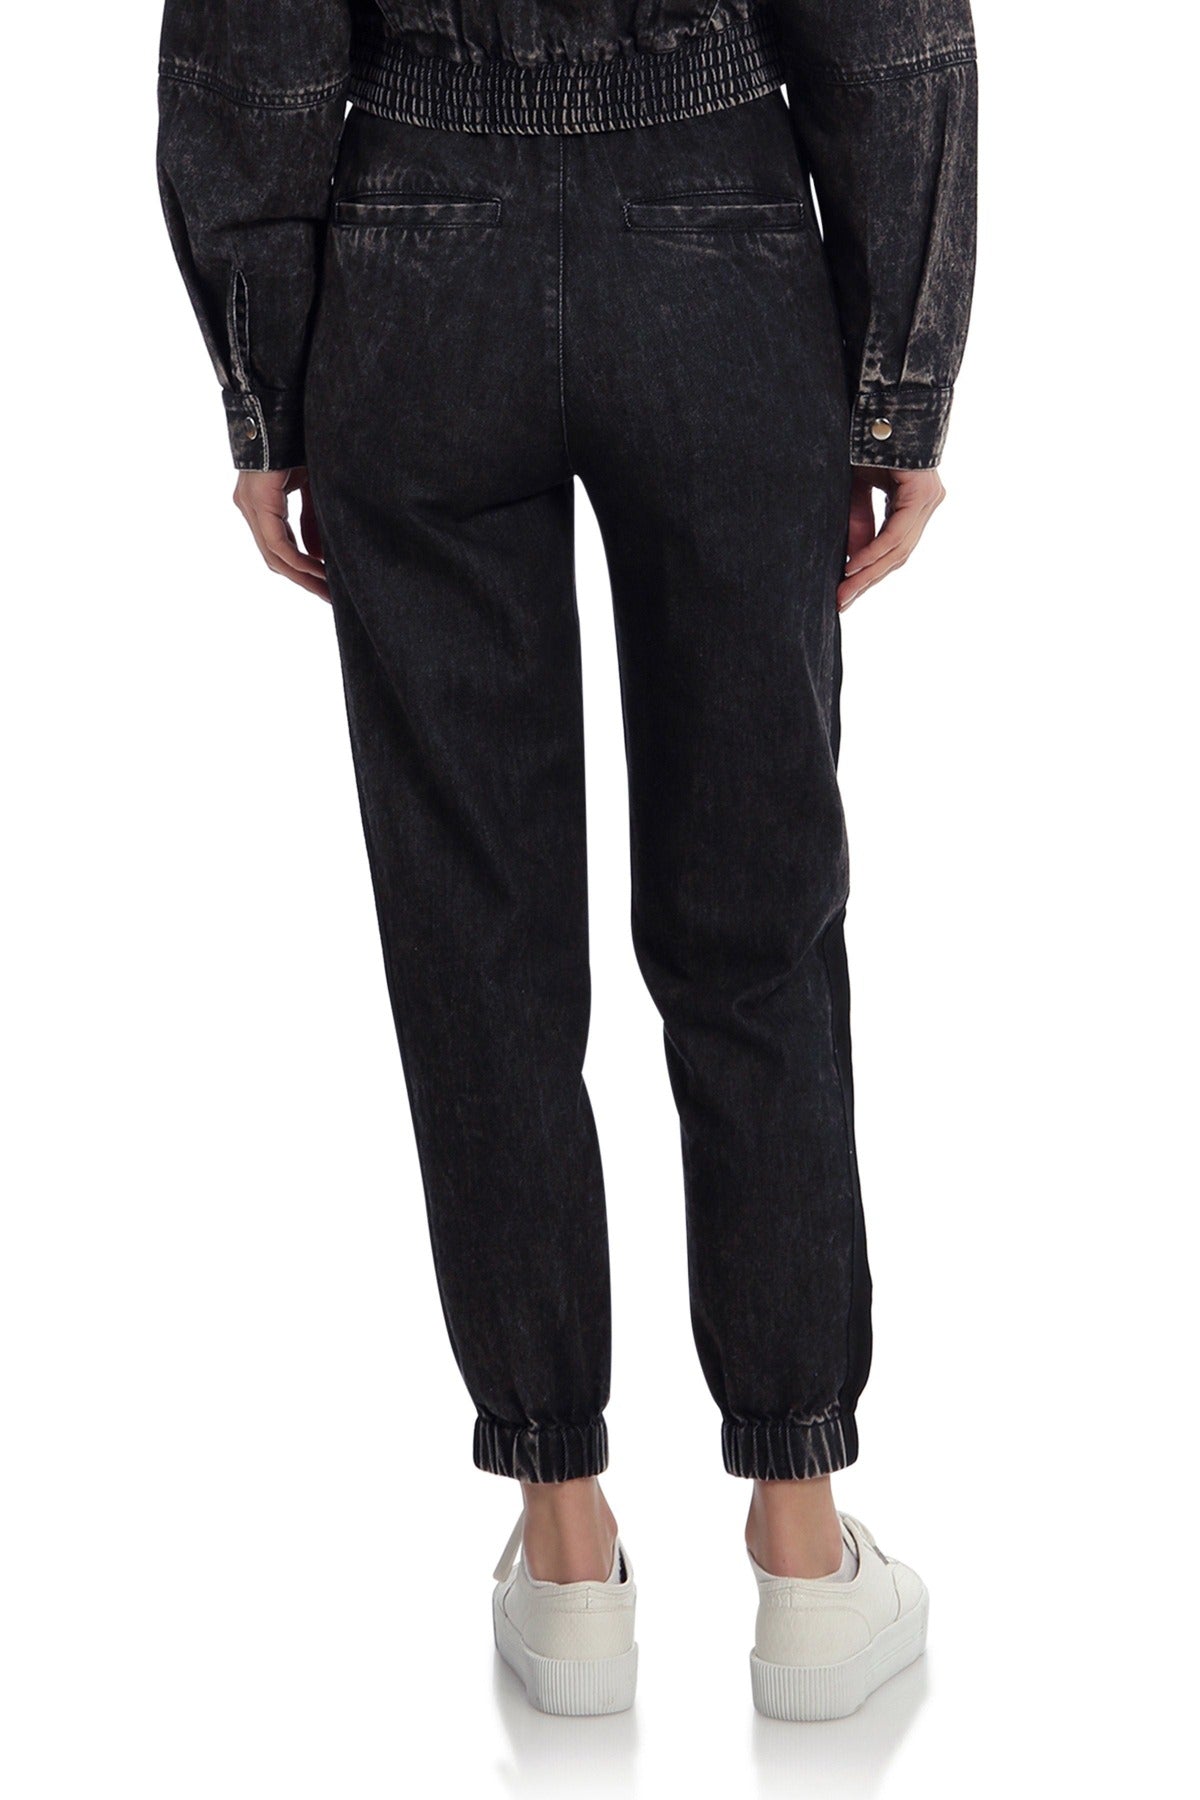 Washed Denim Joggers Cloudy Black - Flattering Designer Fashion Pull-on Pants for Women